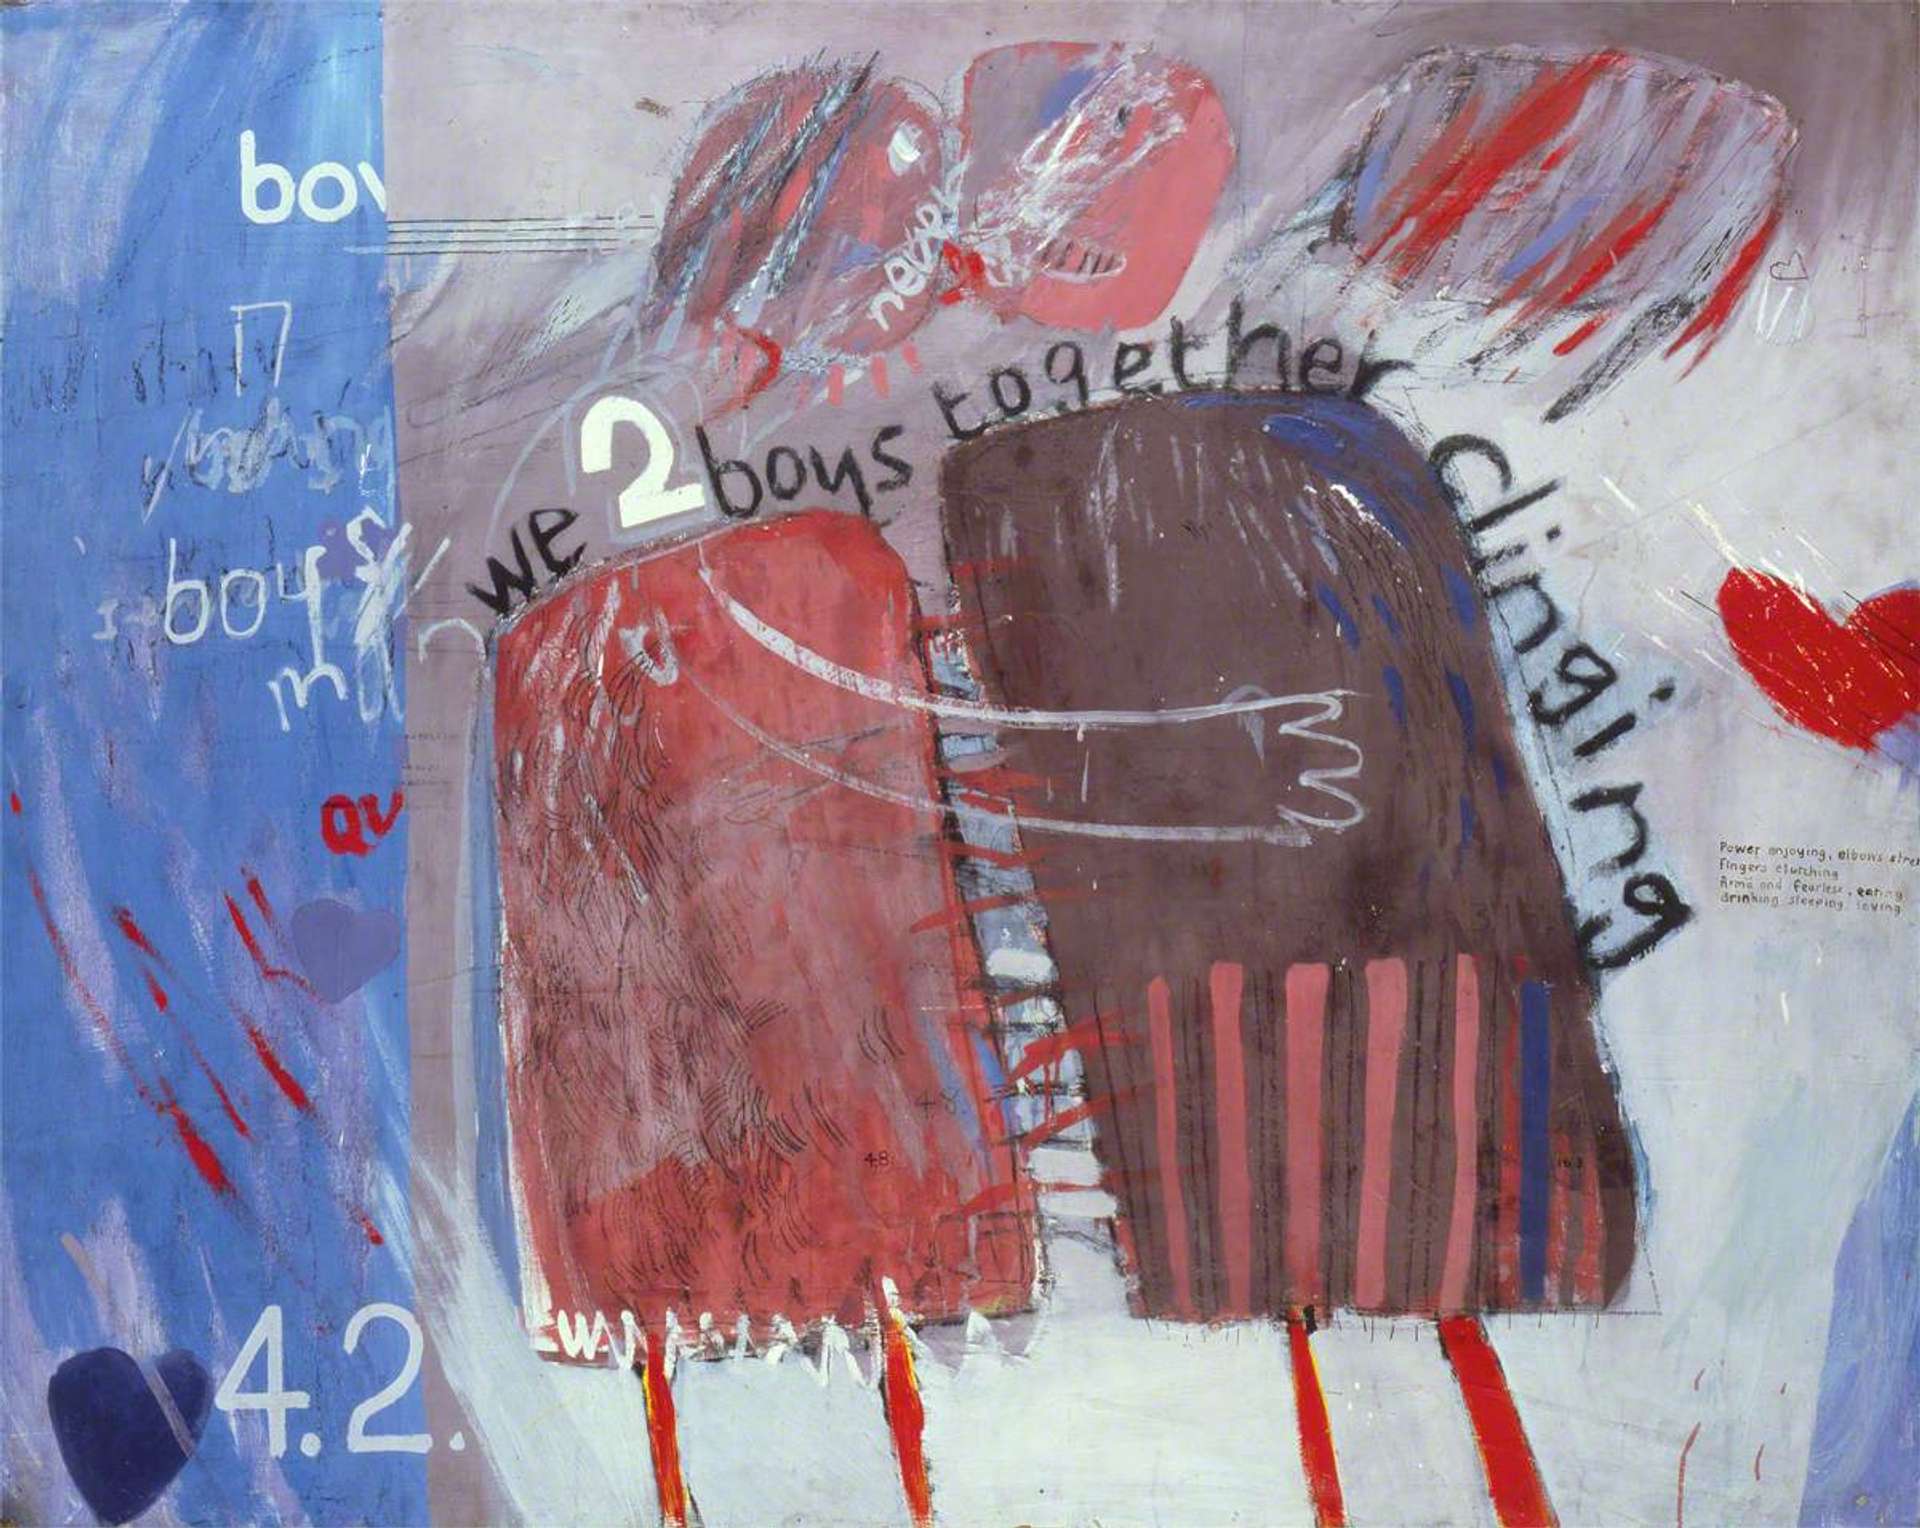 One red rectangular figure reaching out and holding a rectangular background with text that reads “we 2 boys together clinging” 